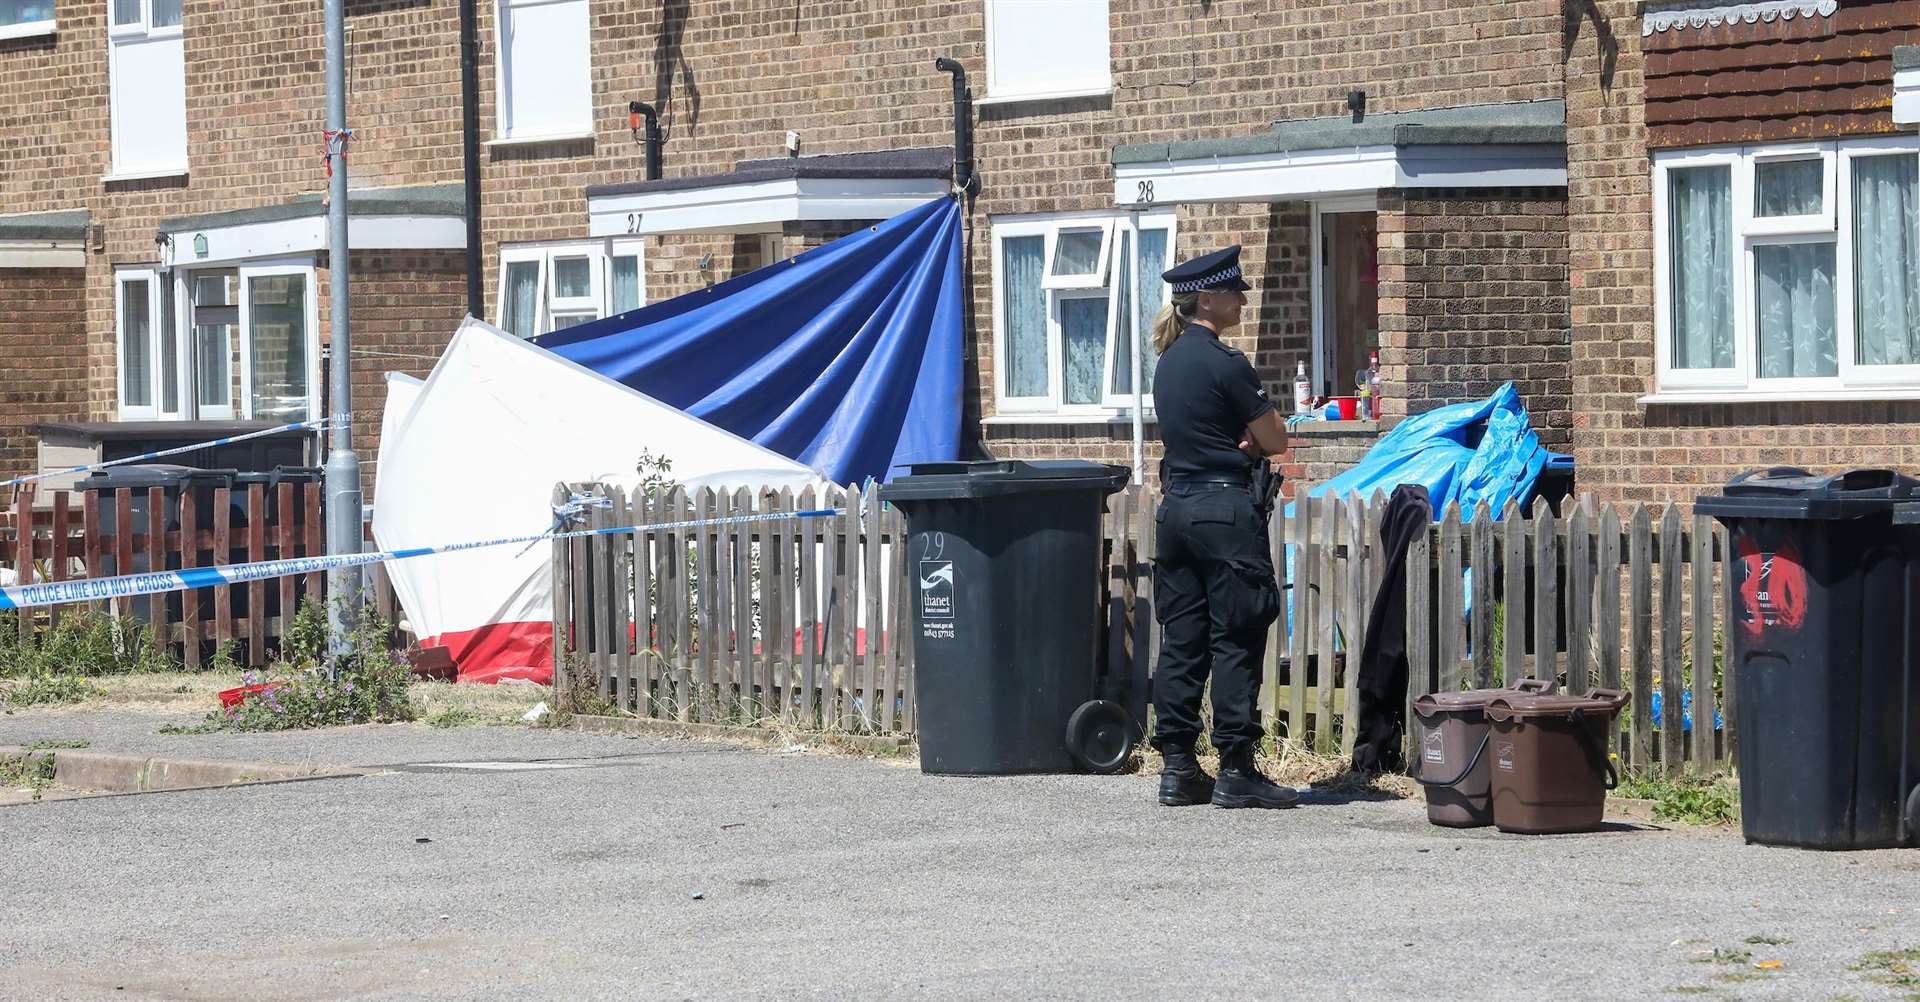 Police at the scene of the alleged murder in Elfrida Close, Margate. Picture: UKNIP